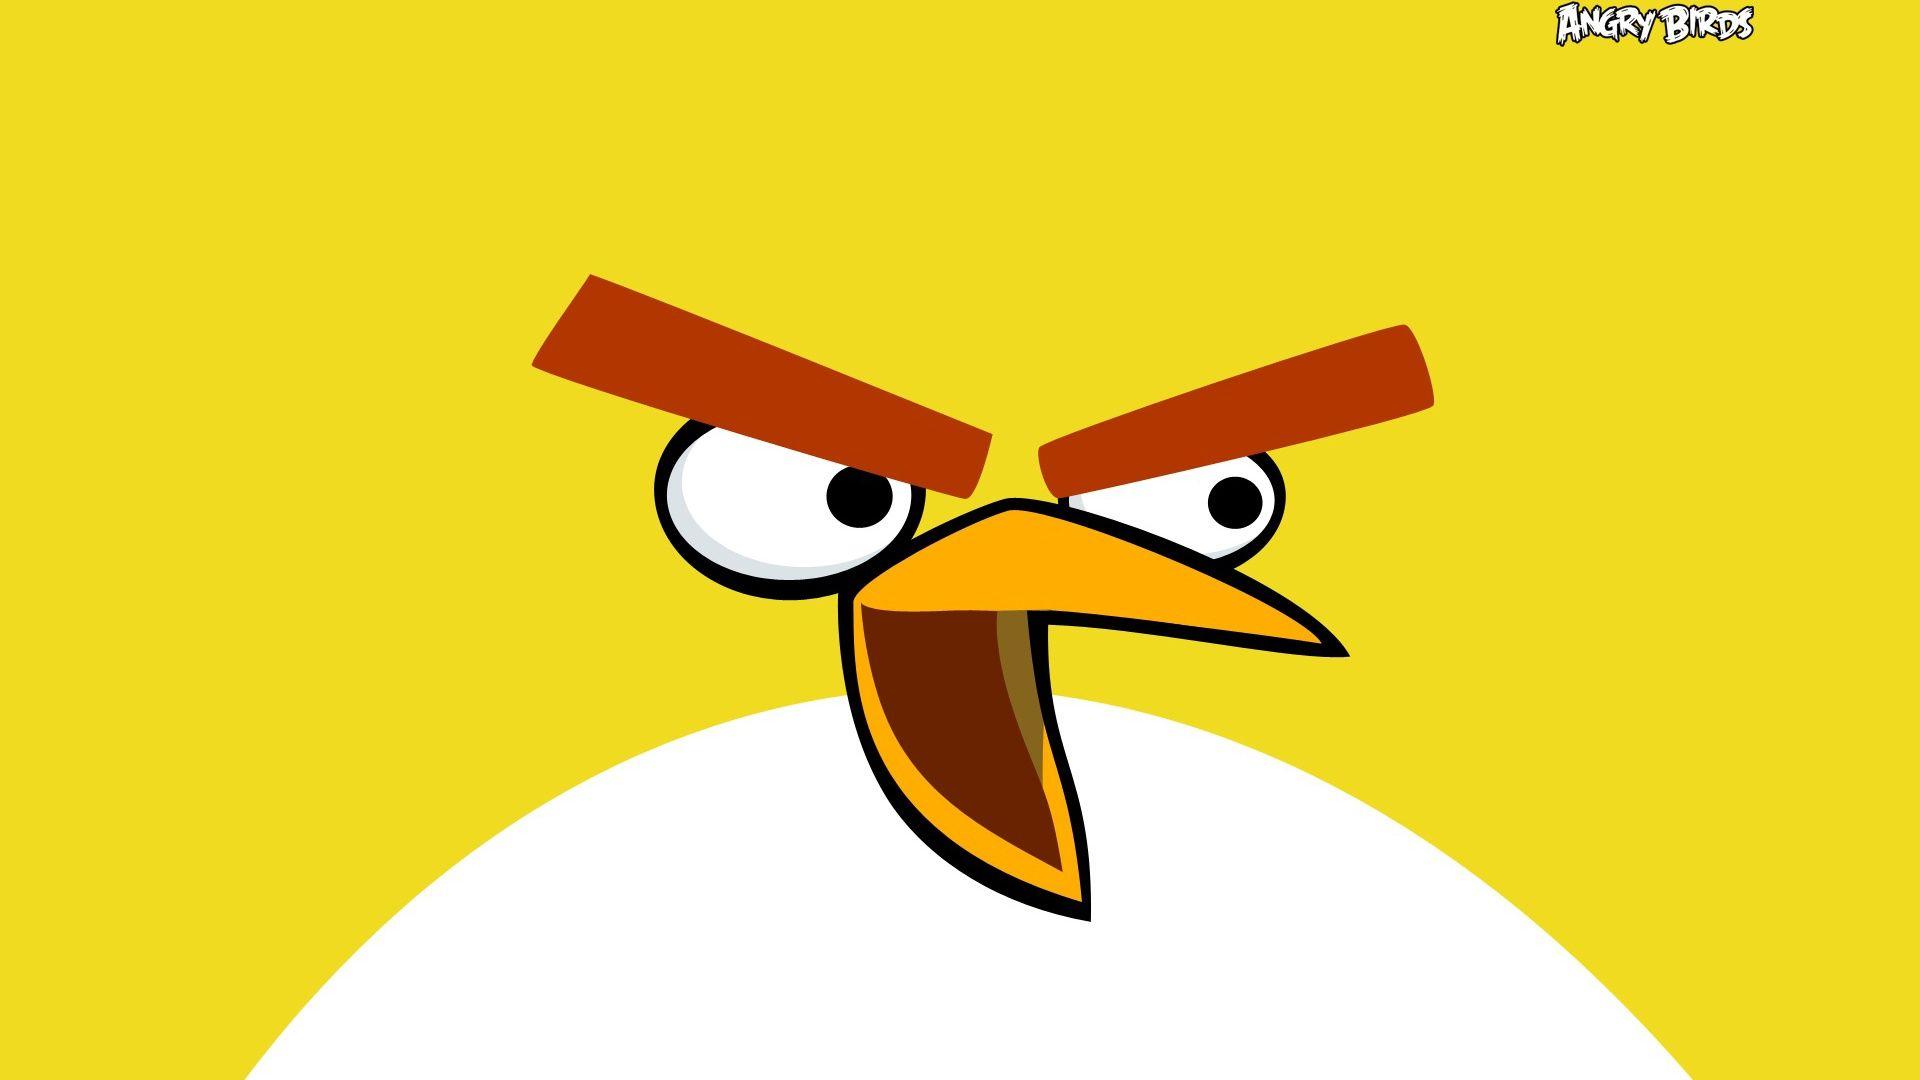 Angry Birds Yellow wallpaper